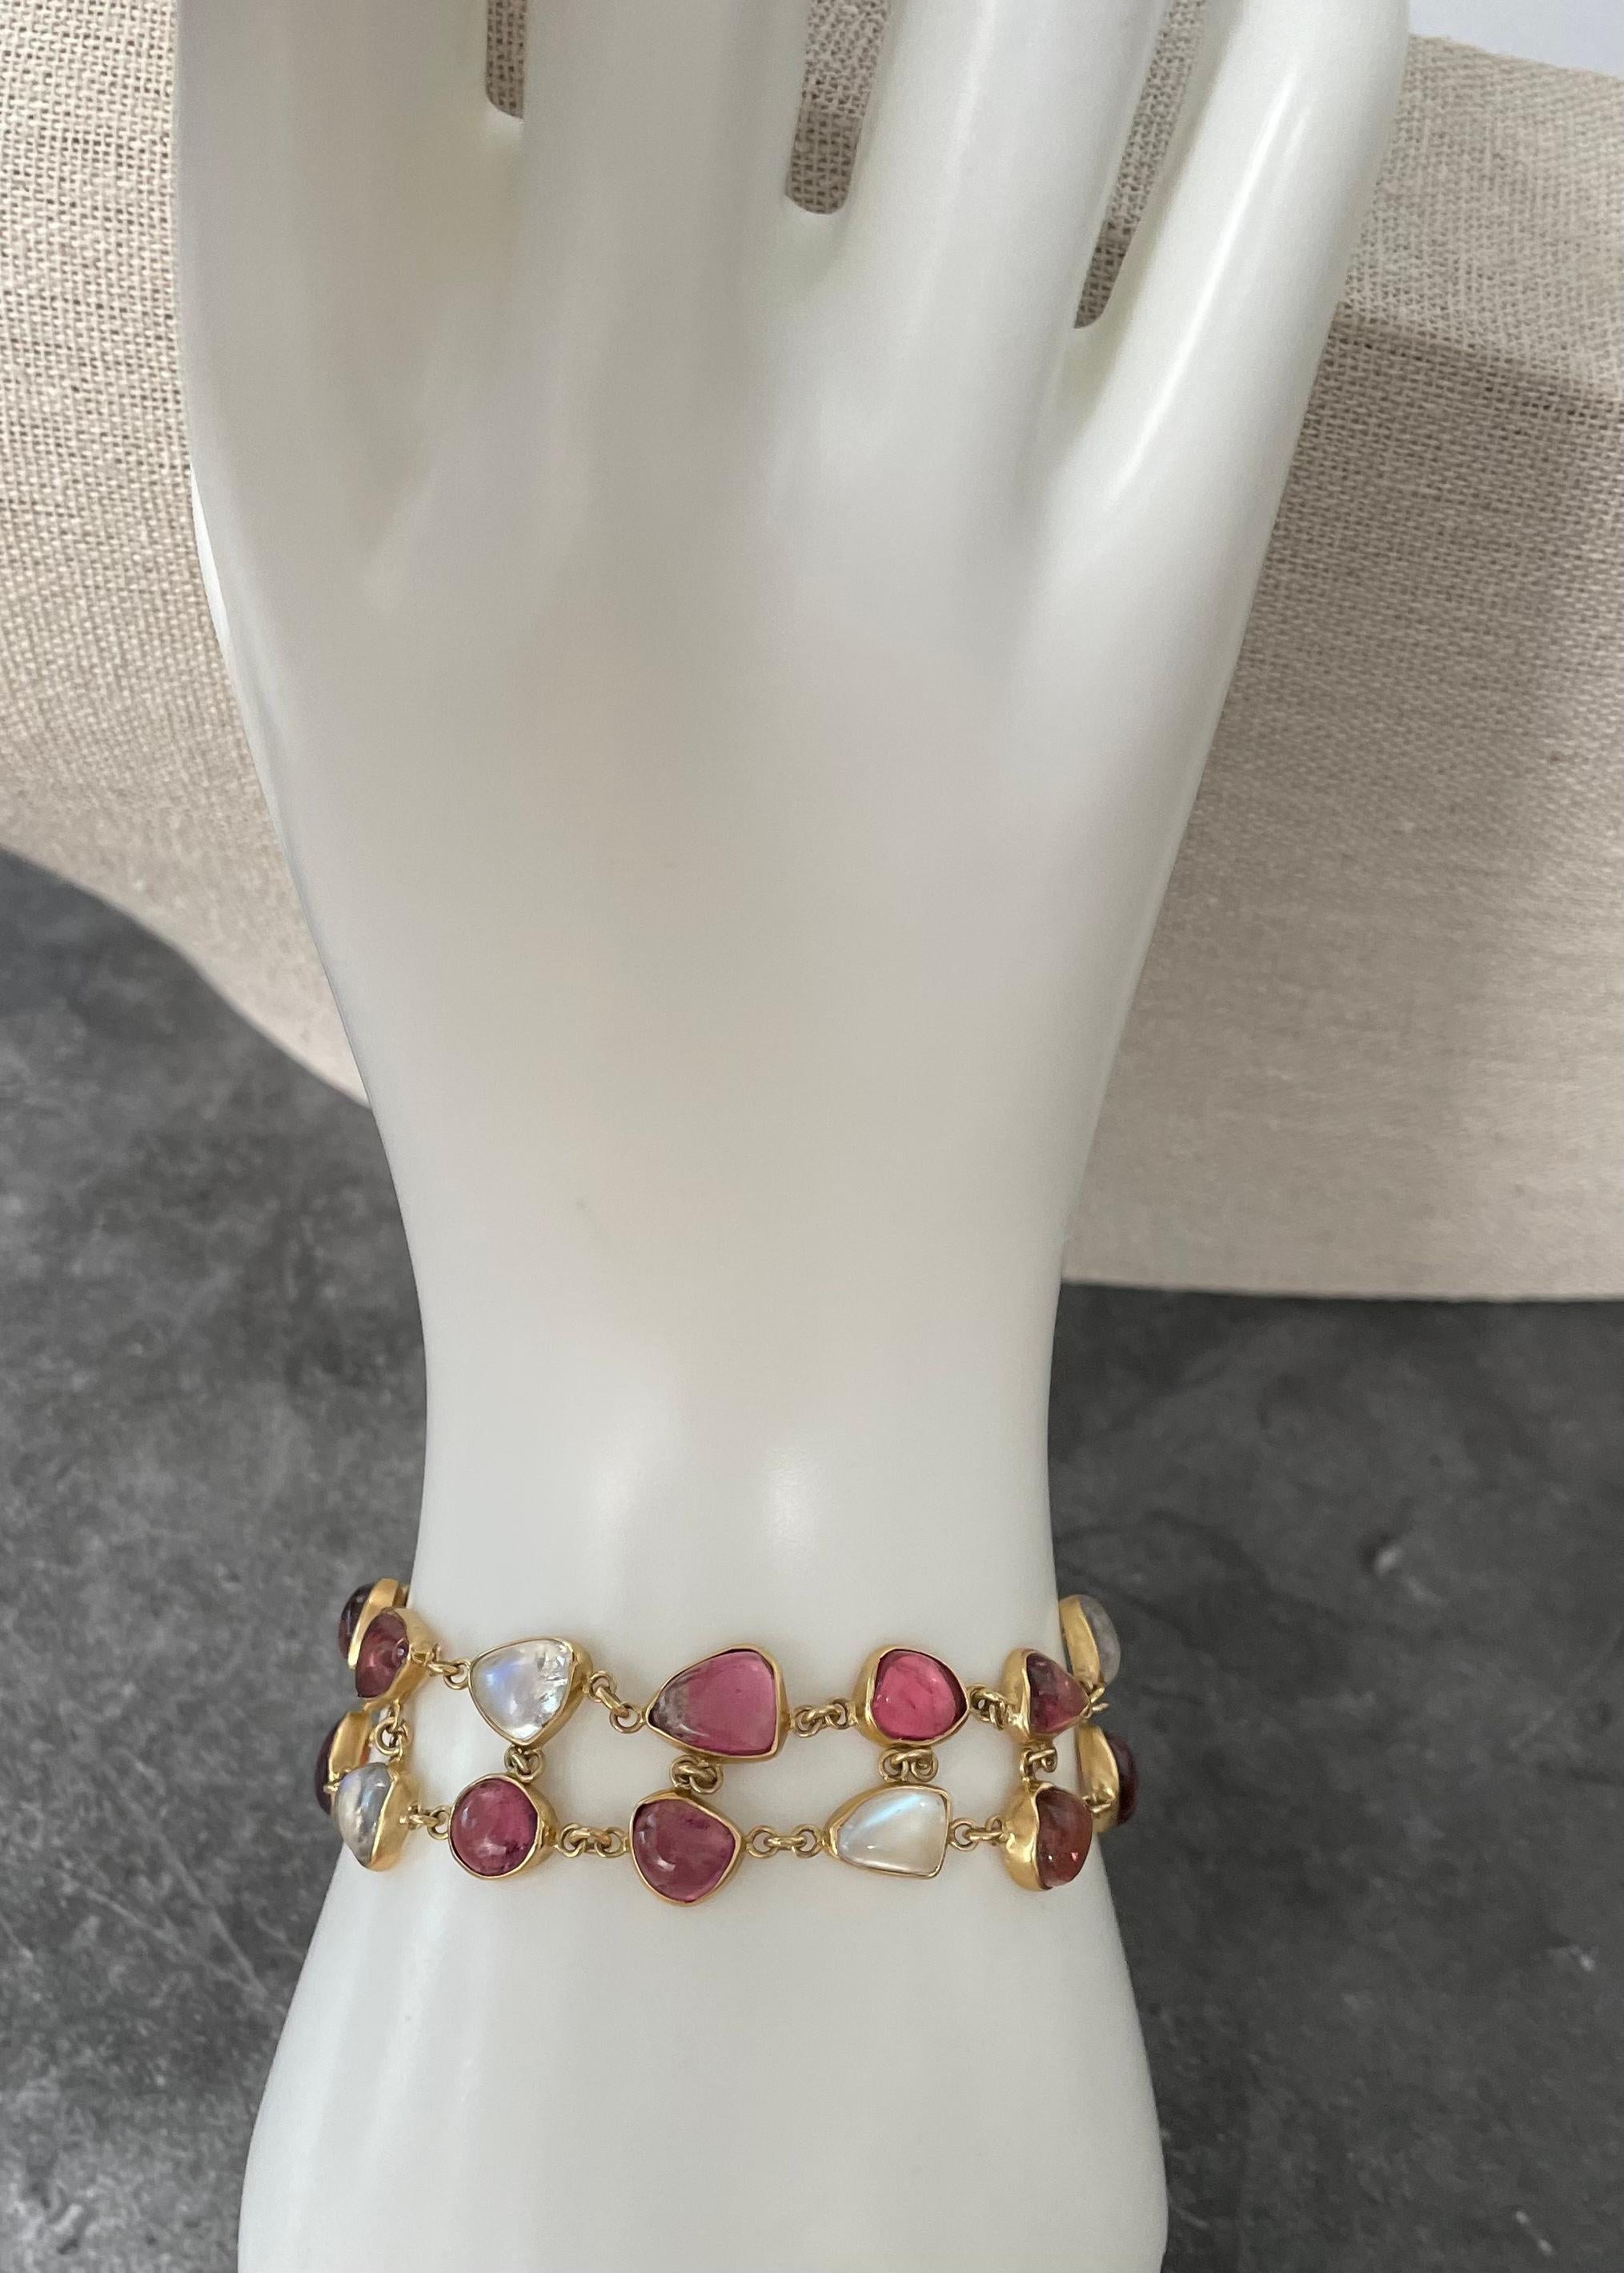 A combination of 20 organically shaped cabochons of mixed pink tourmaline and rainbow moonstone approximately 5 x 7 mm in size are handset in simple 18K bezels and joined in two rows in this sweet 18K toggle bracelet.  Matte-finish. This bracelet is